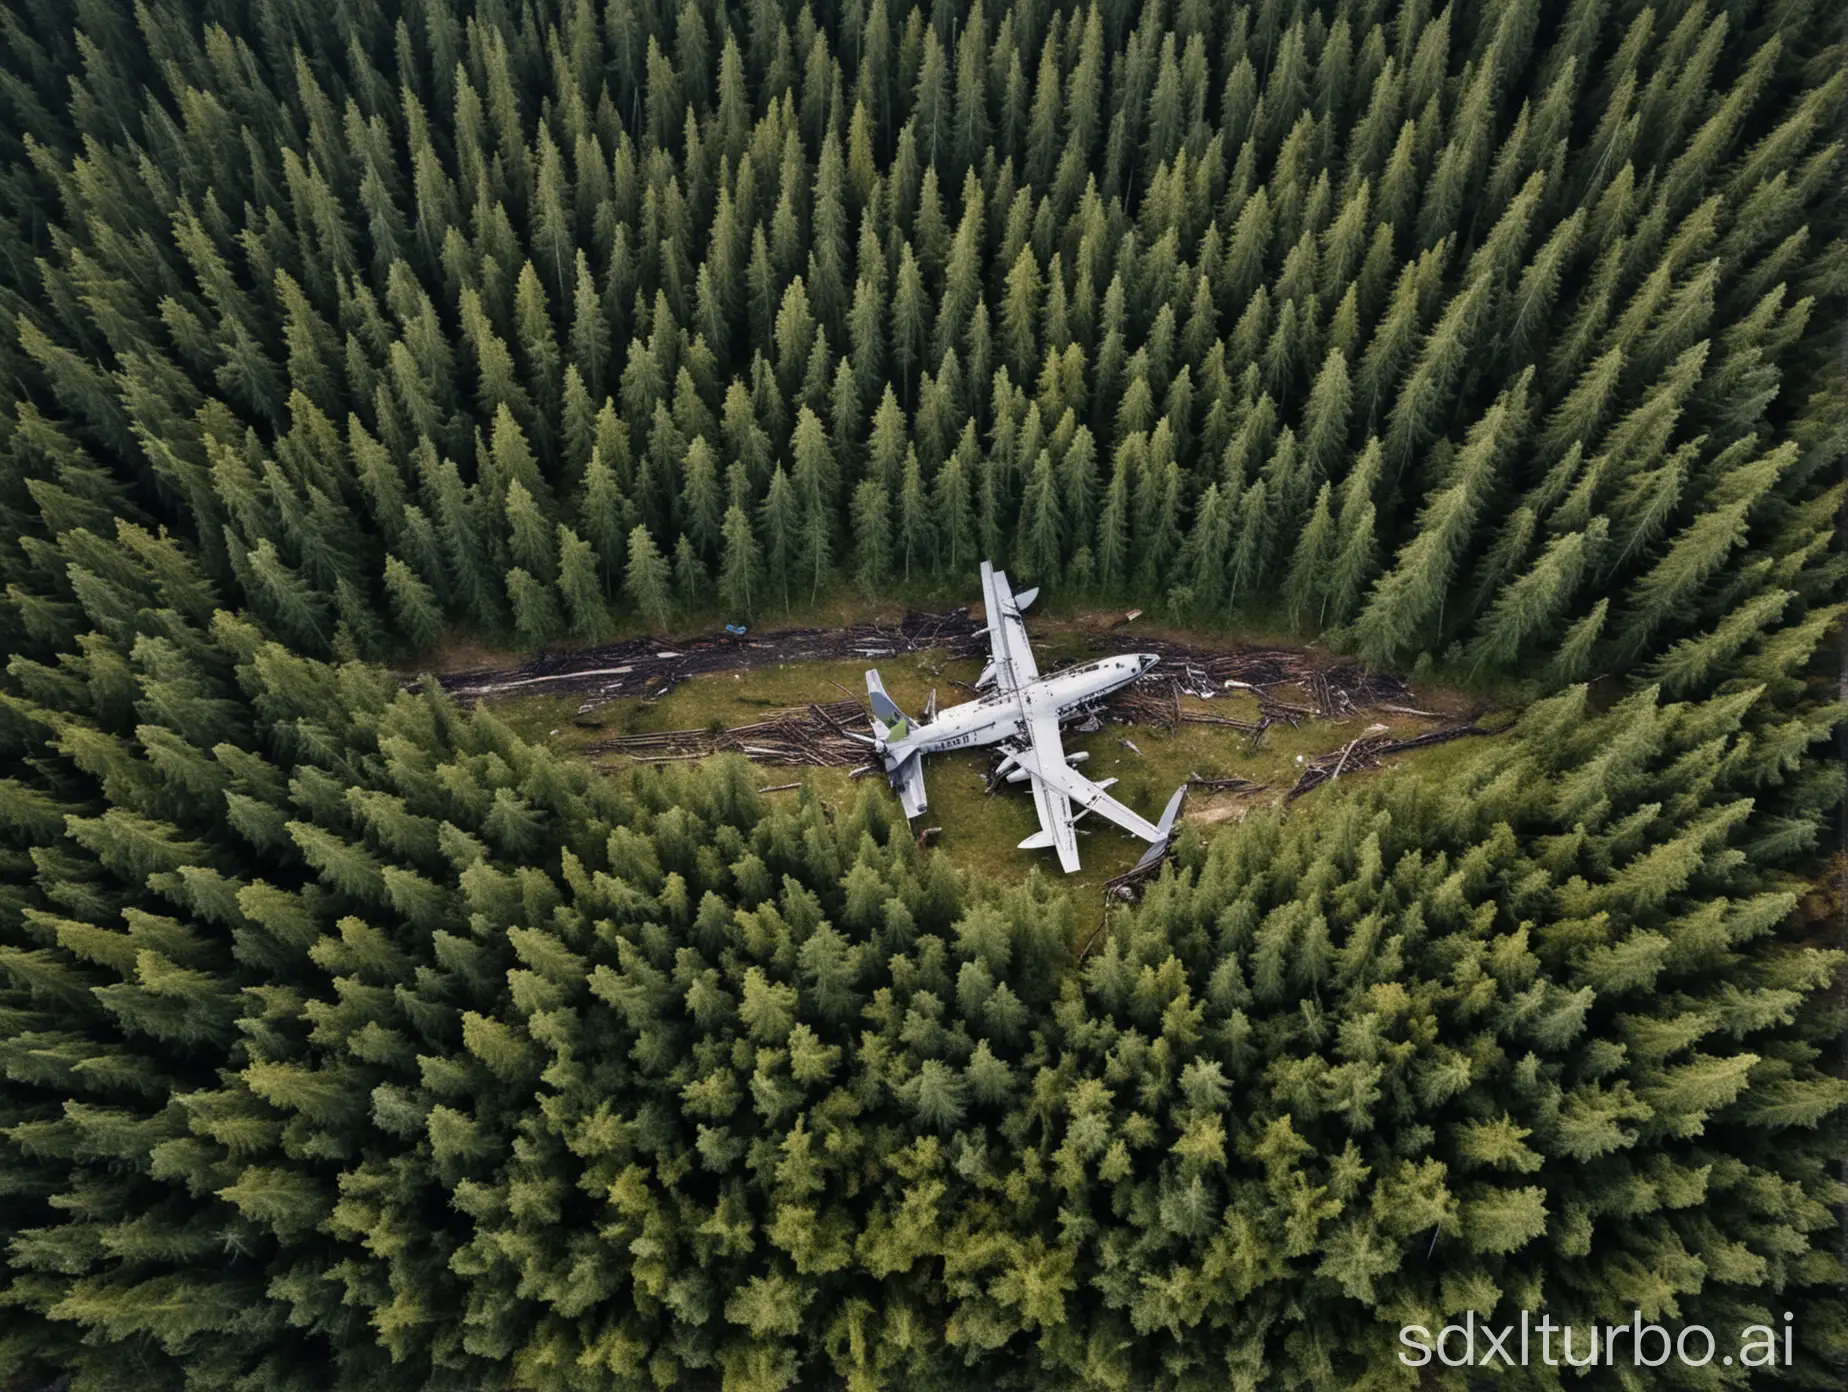 Aerial-View-of-Forest-Inside-Plane-Crash-Site-at-1000-Meters